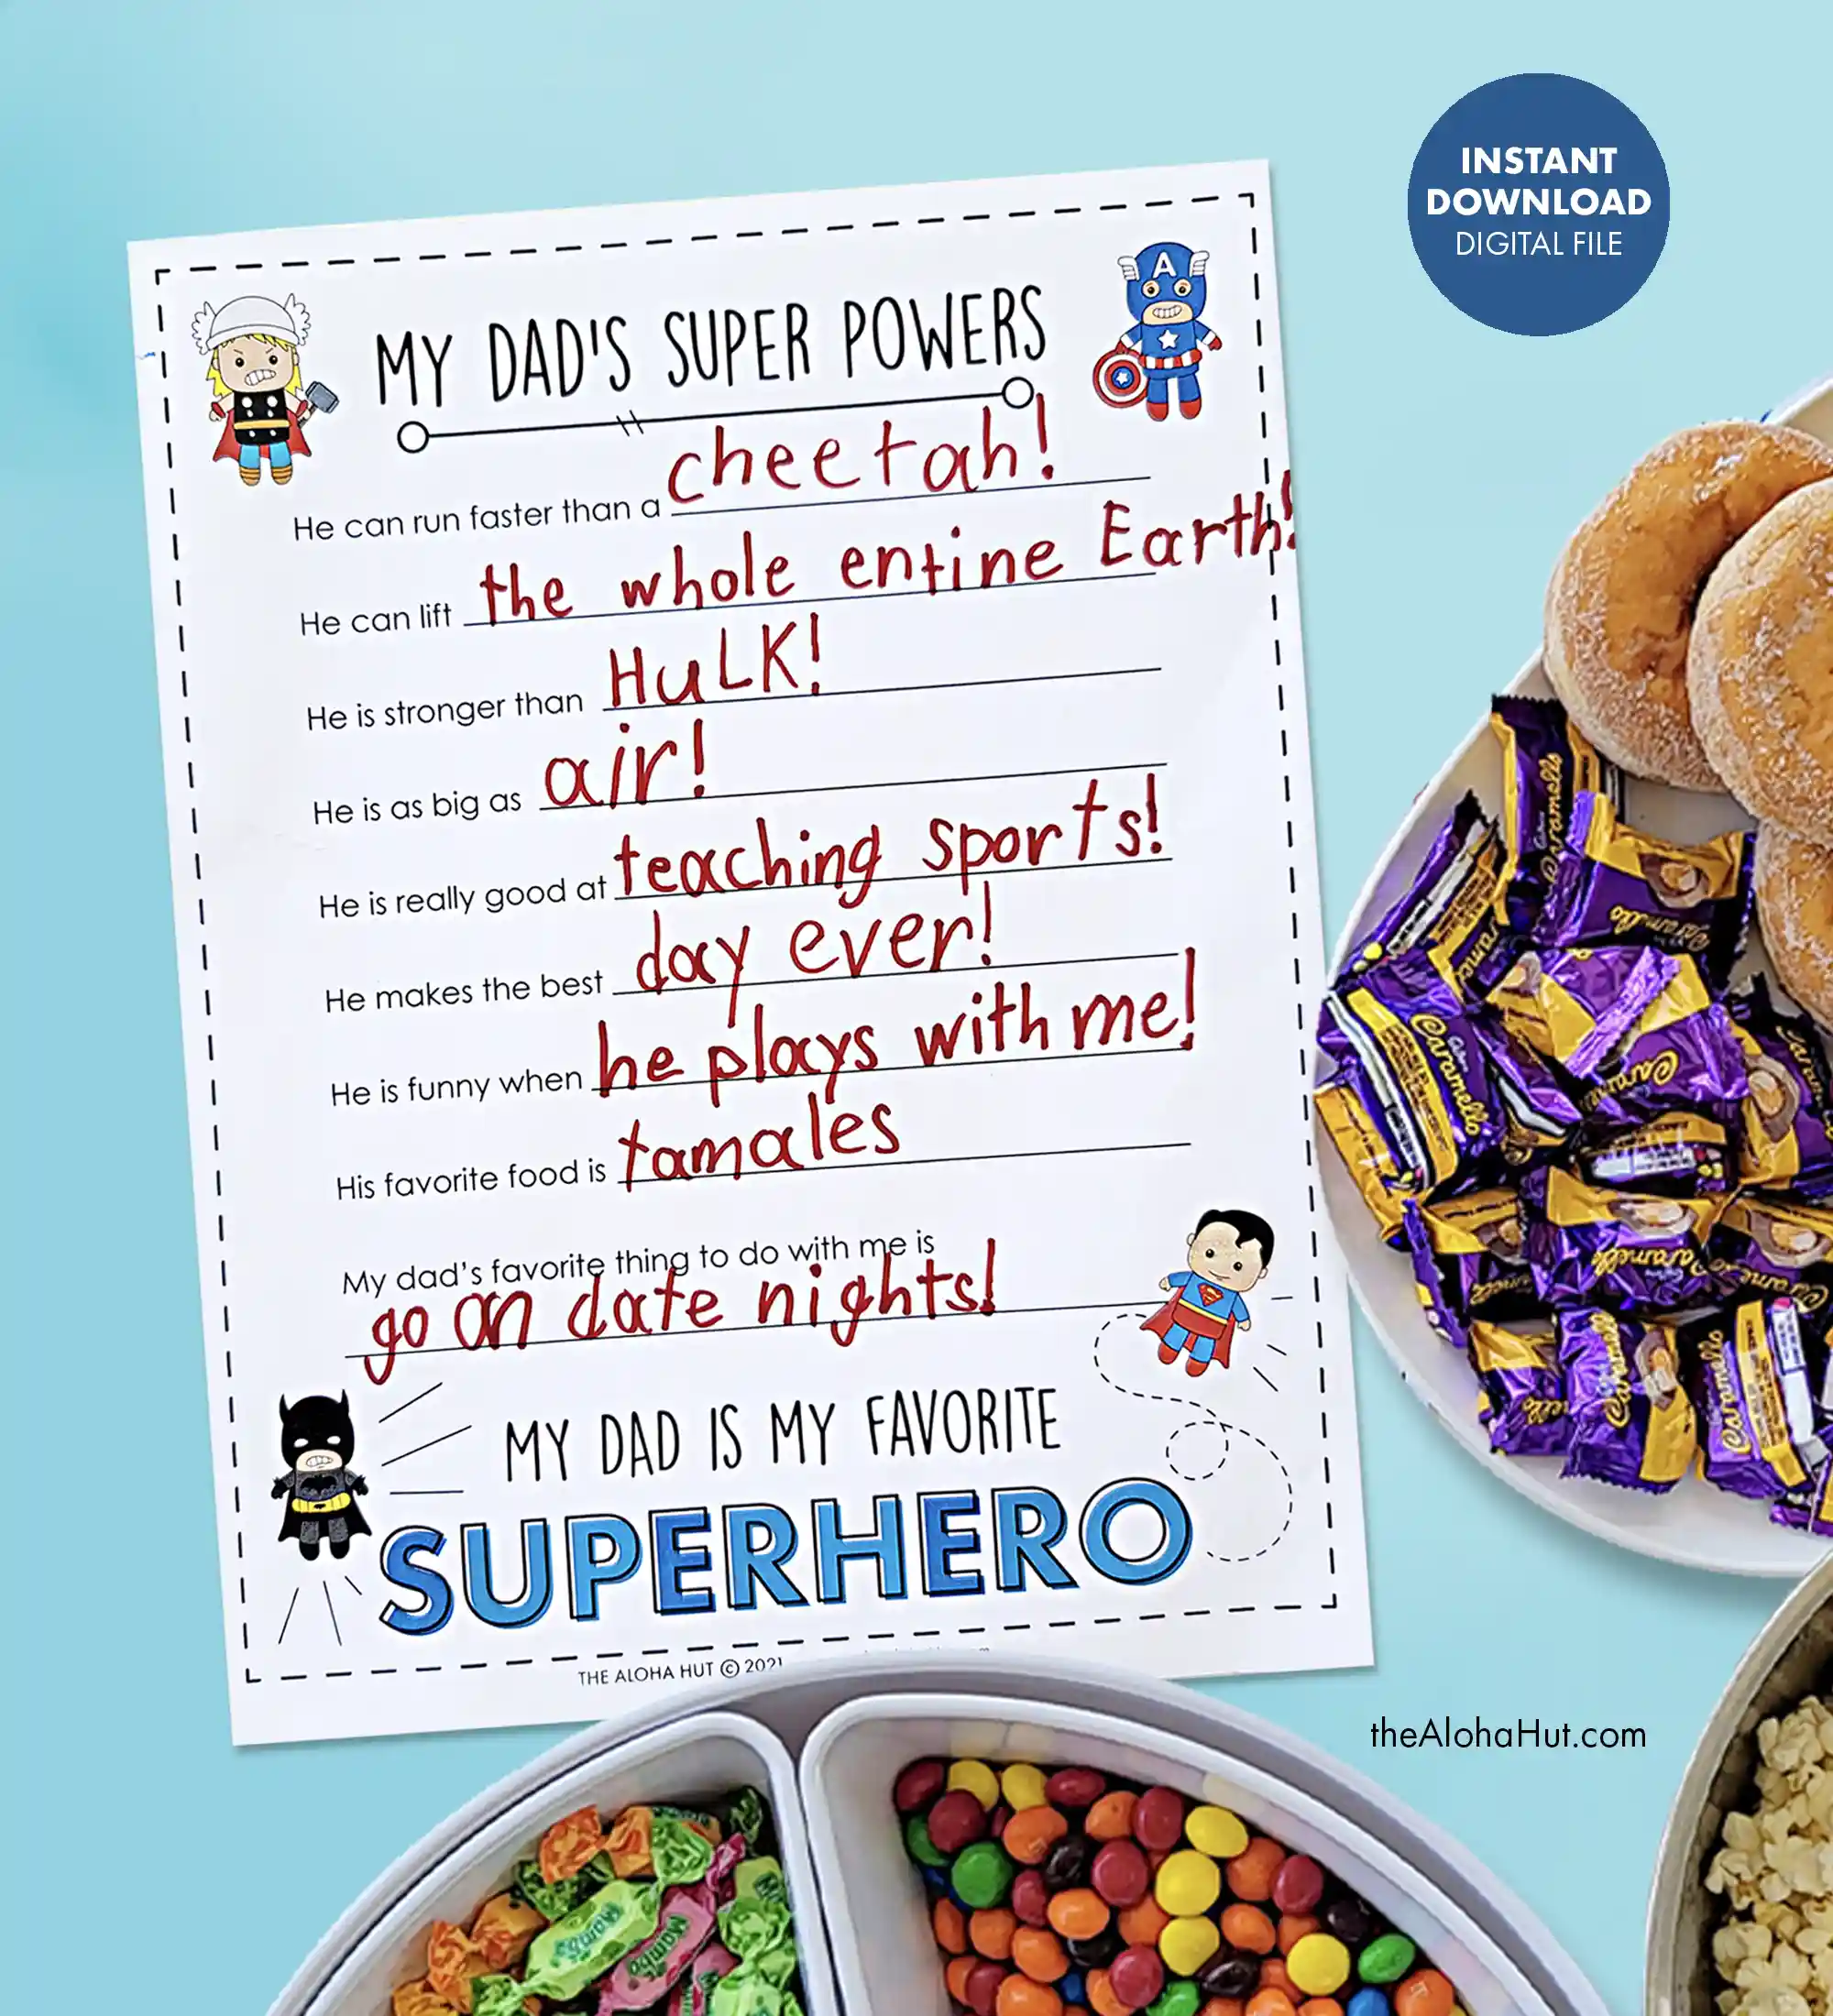 All About Dad Father's Day kids activity and fill in the blank worksheet. Tell dad you love him this Father's Day with this easy printable Father's Day card that is superhero themed for the super hero dad! The All About Dad printable activity page is perfect for the memory book and a fun tradition to do for dad each year with the kids.